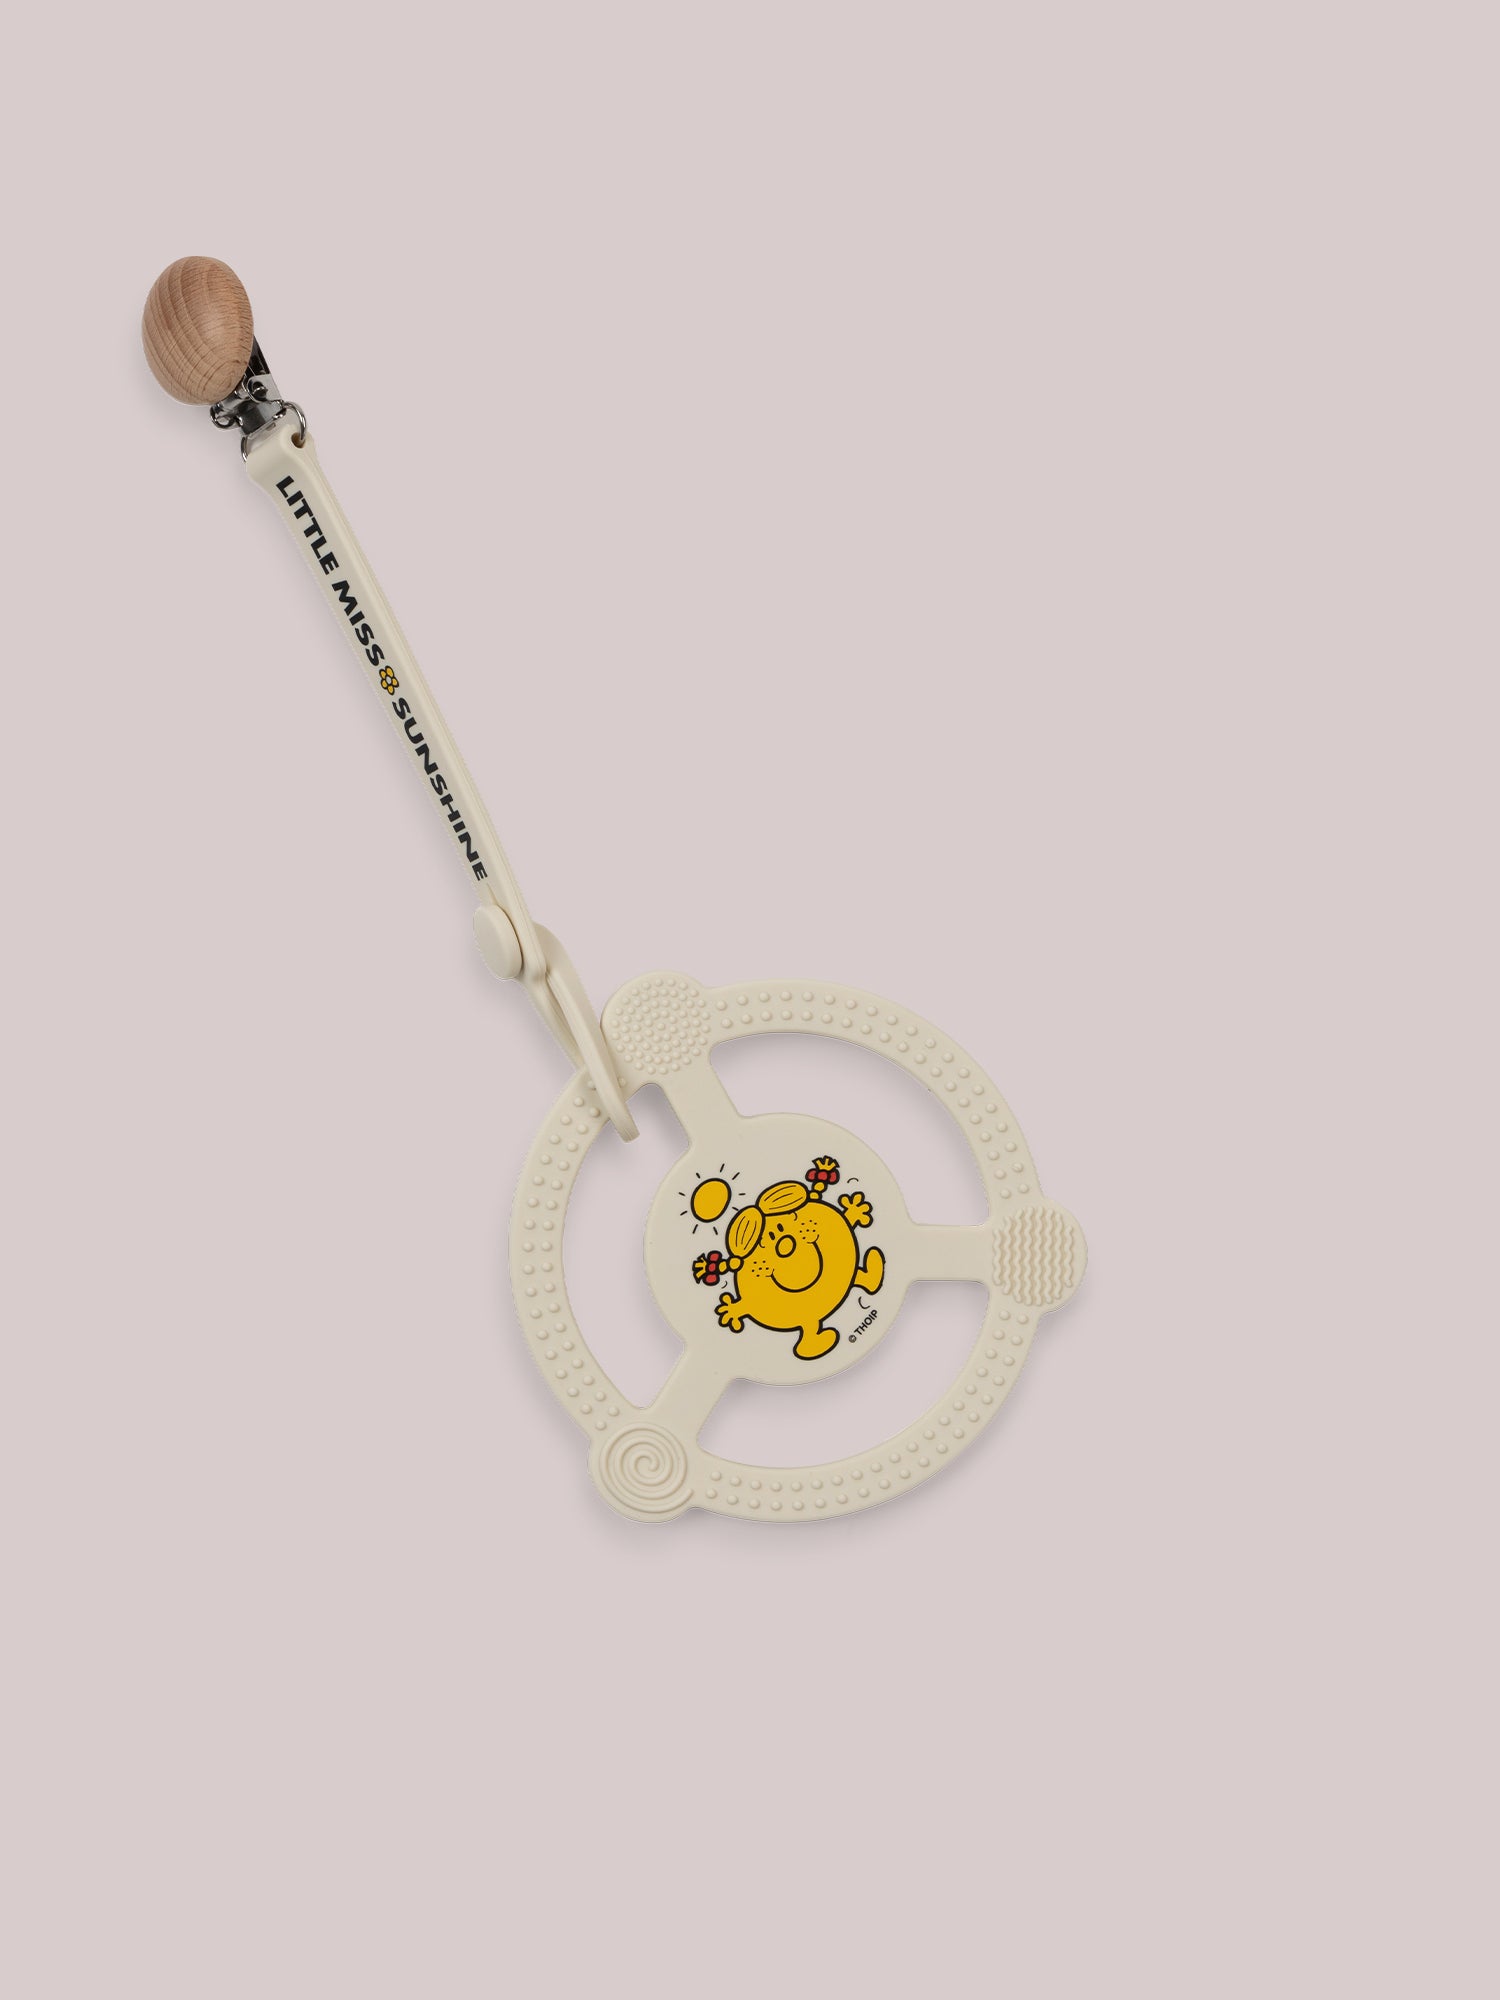 Little Miss Sunshine Silicone Teether ring flat lay with clip attached